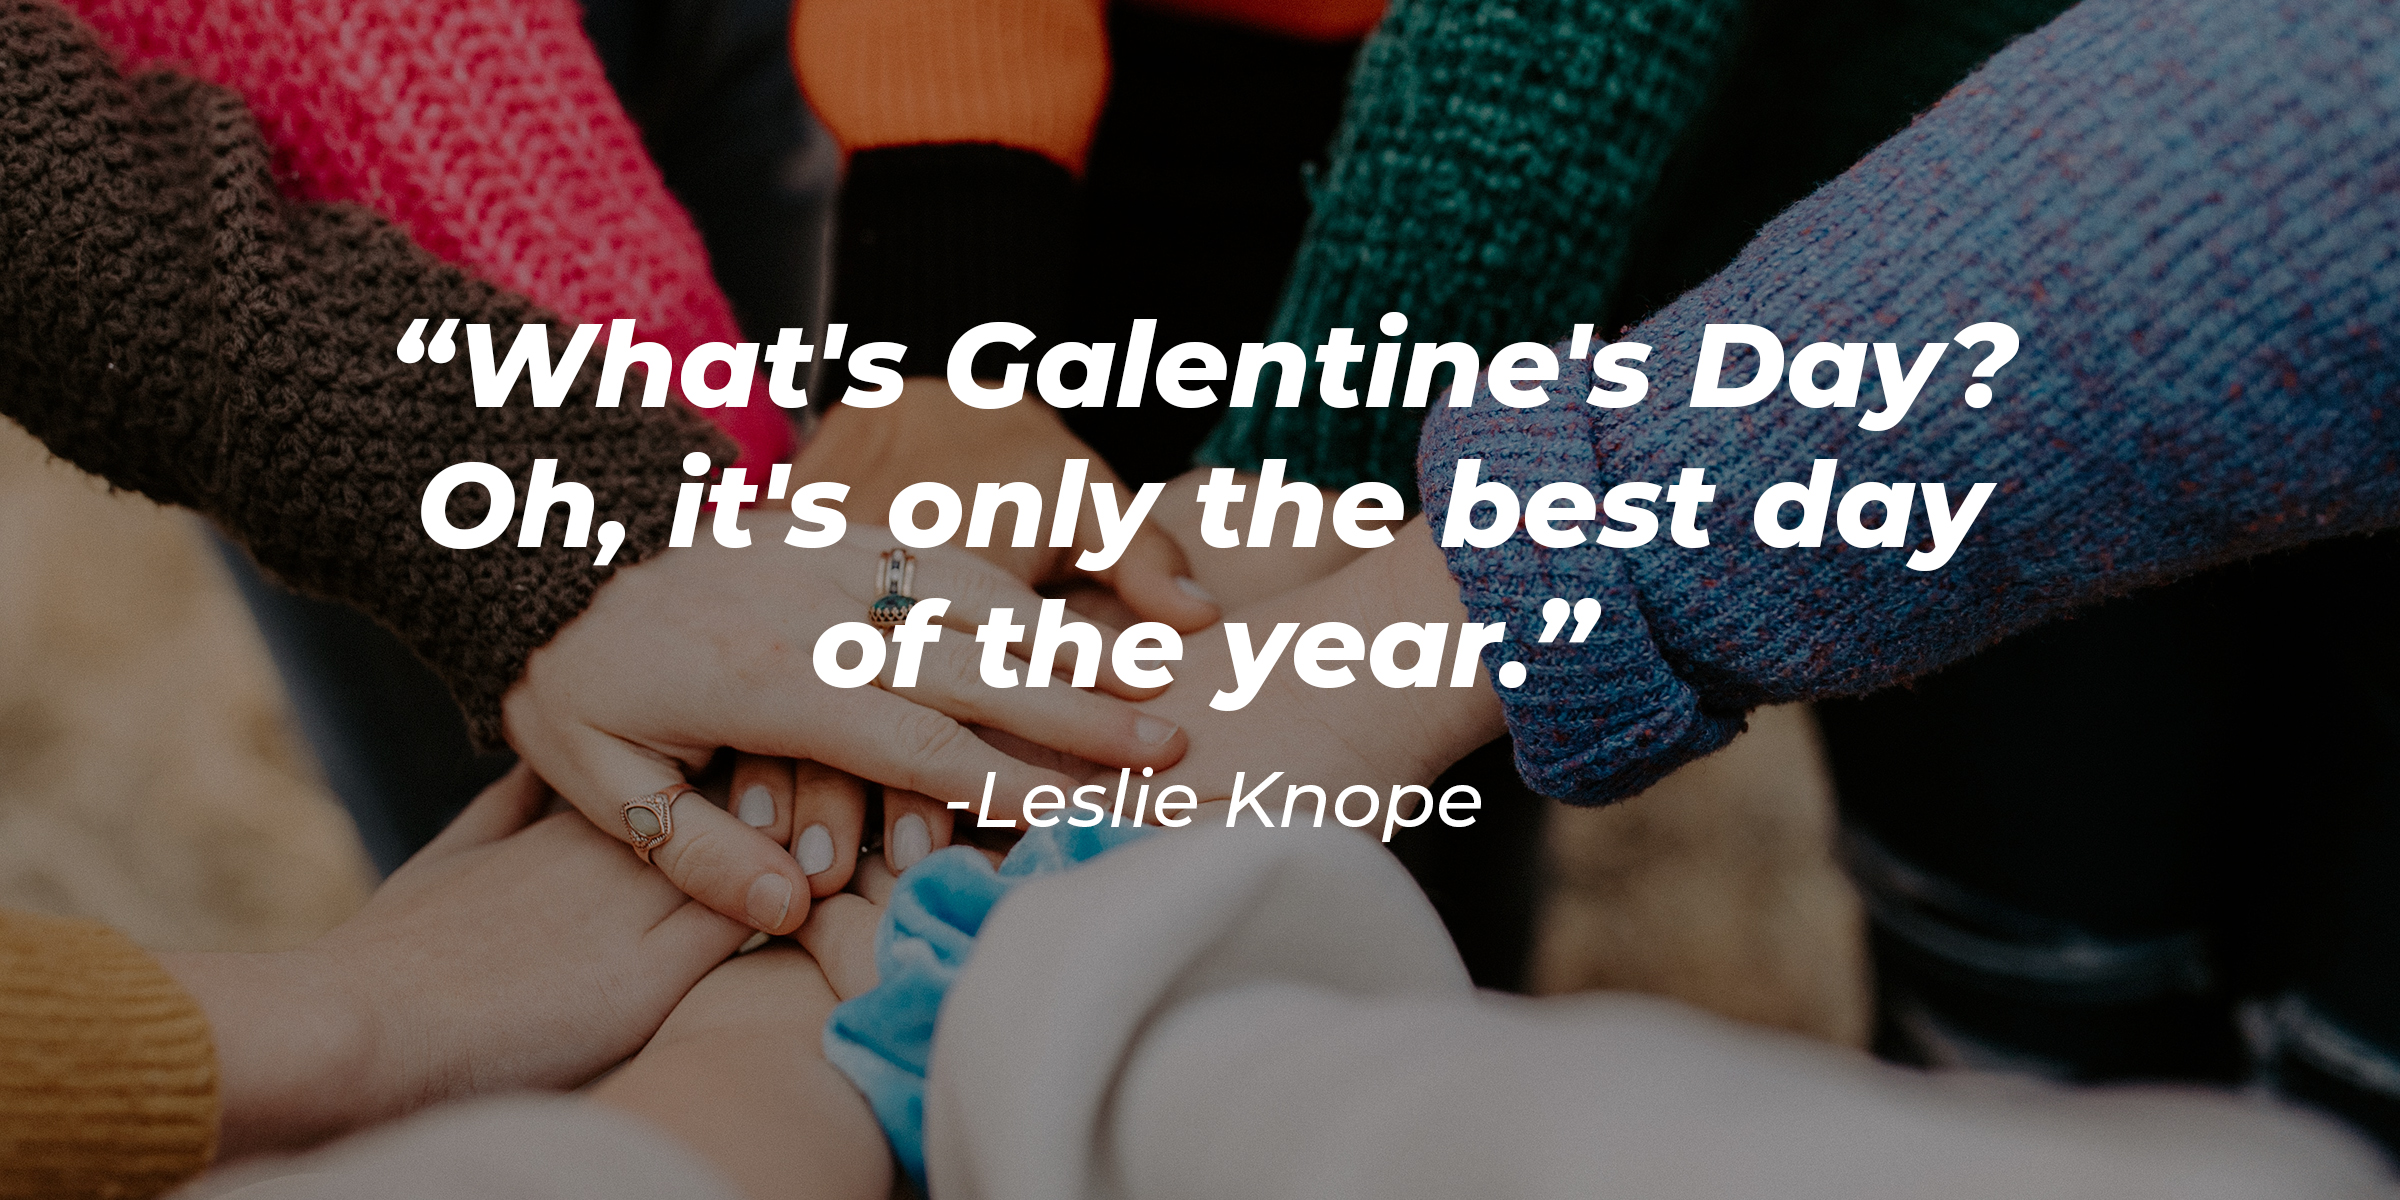 Leslie Knope's quote: "What's Galentine's Day? Oh, it's only the best day of the year. | Source: Unsplash